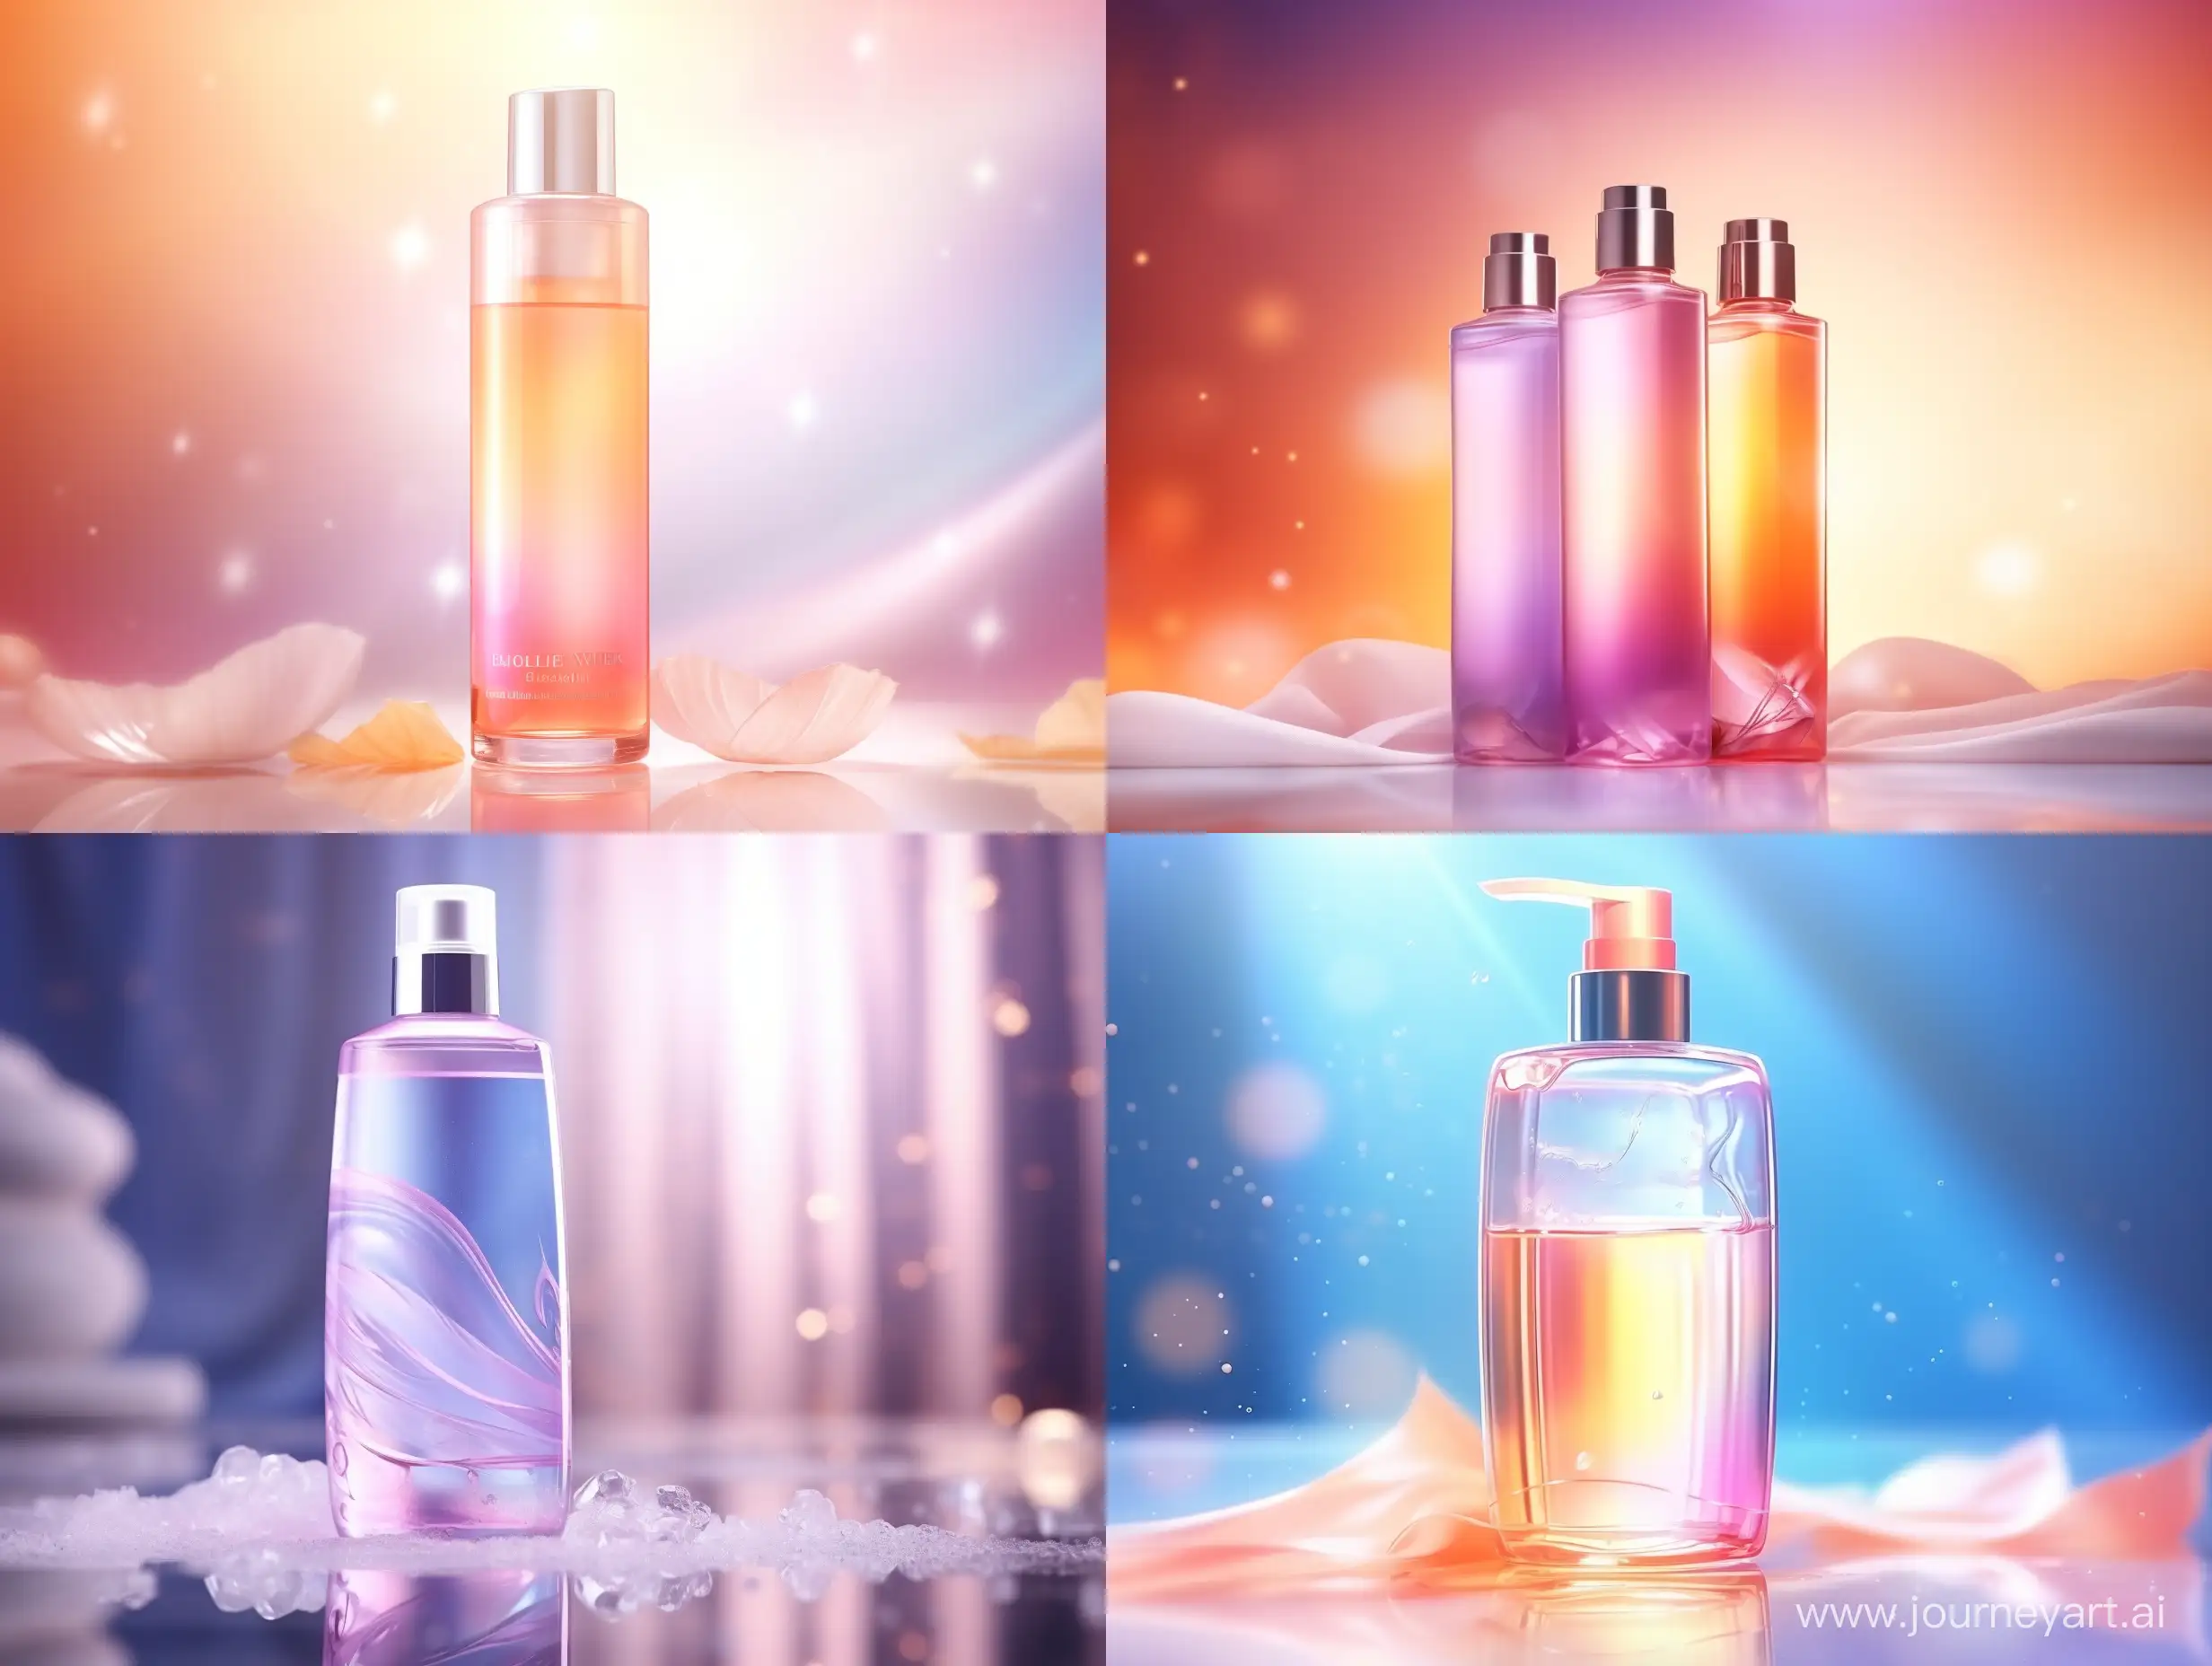 Hydrating-Shower-Gel-on-Elegant-Table-with-Soft-Gradient-Background